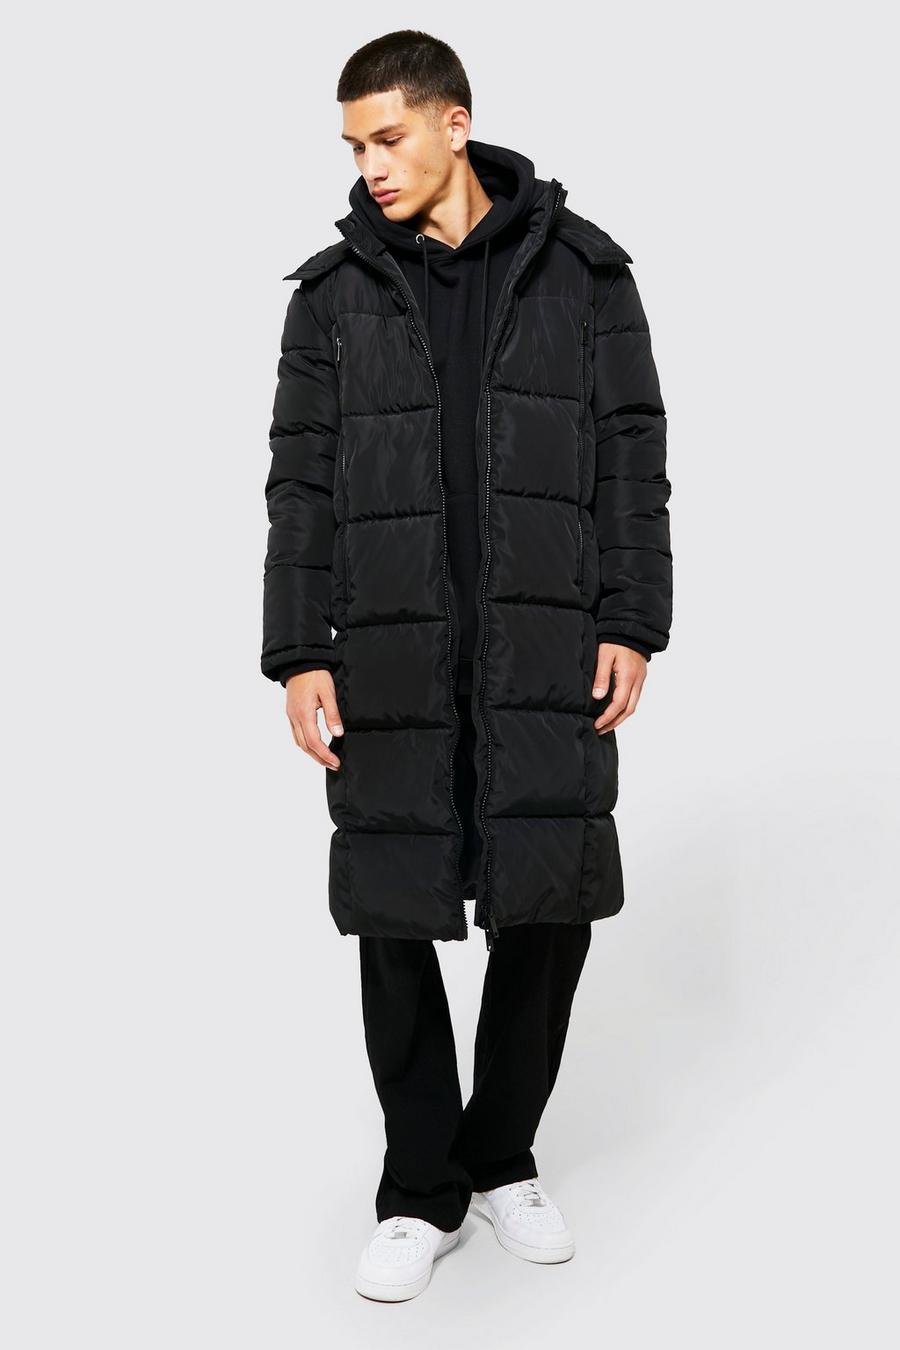 Duvet Coats, Puffer Jackets and Padded Outerwear